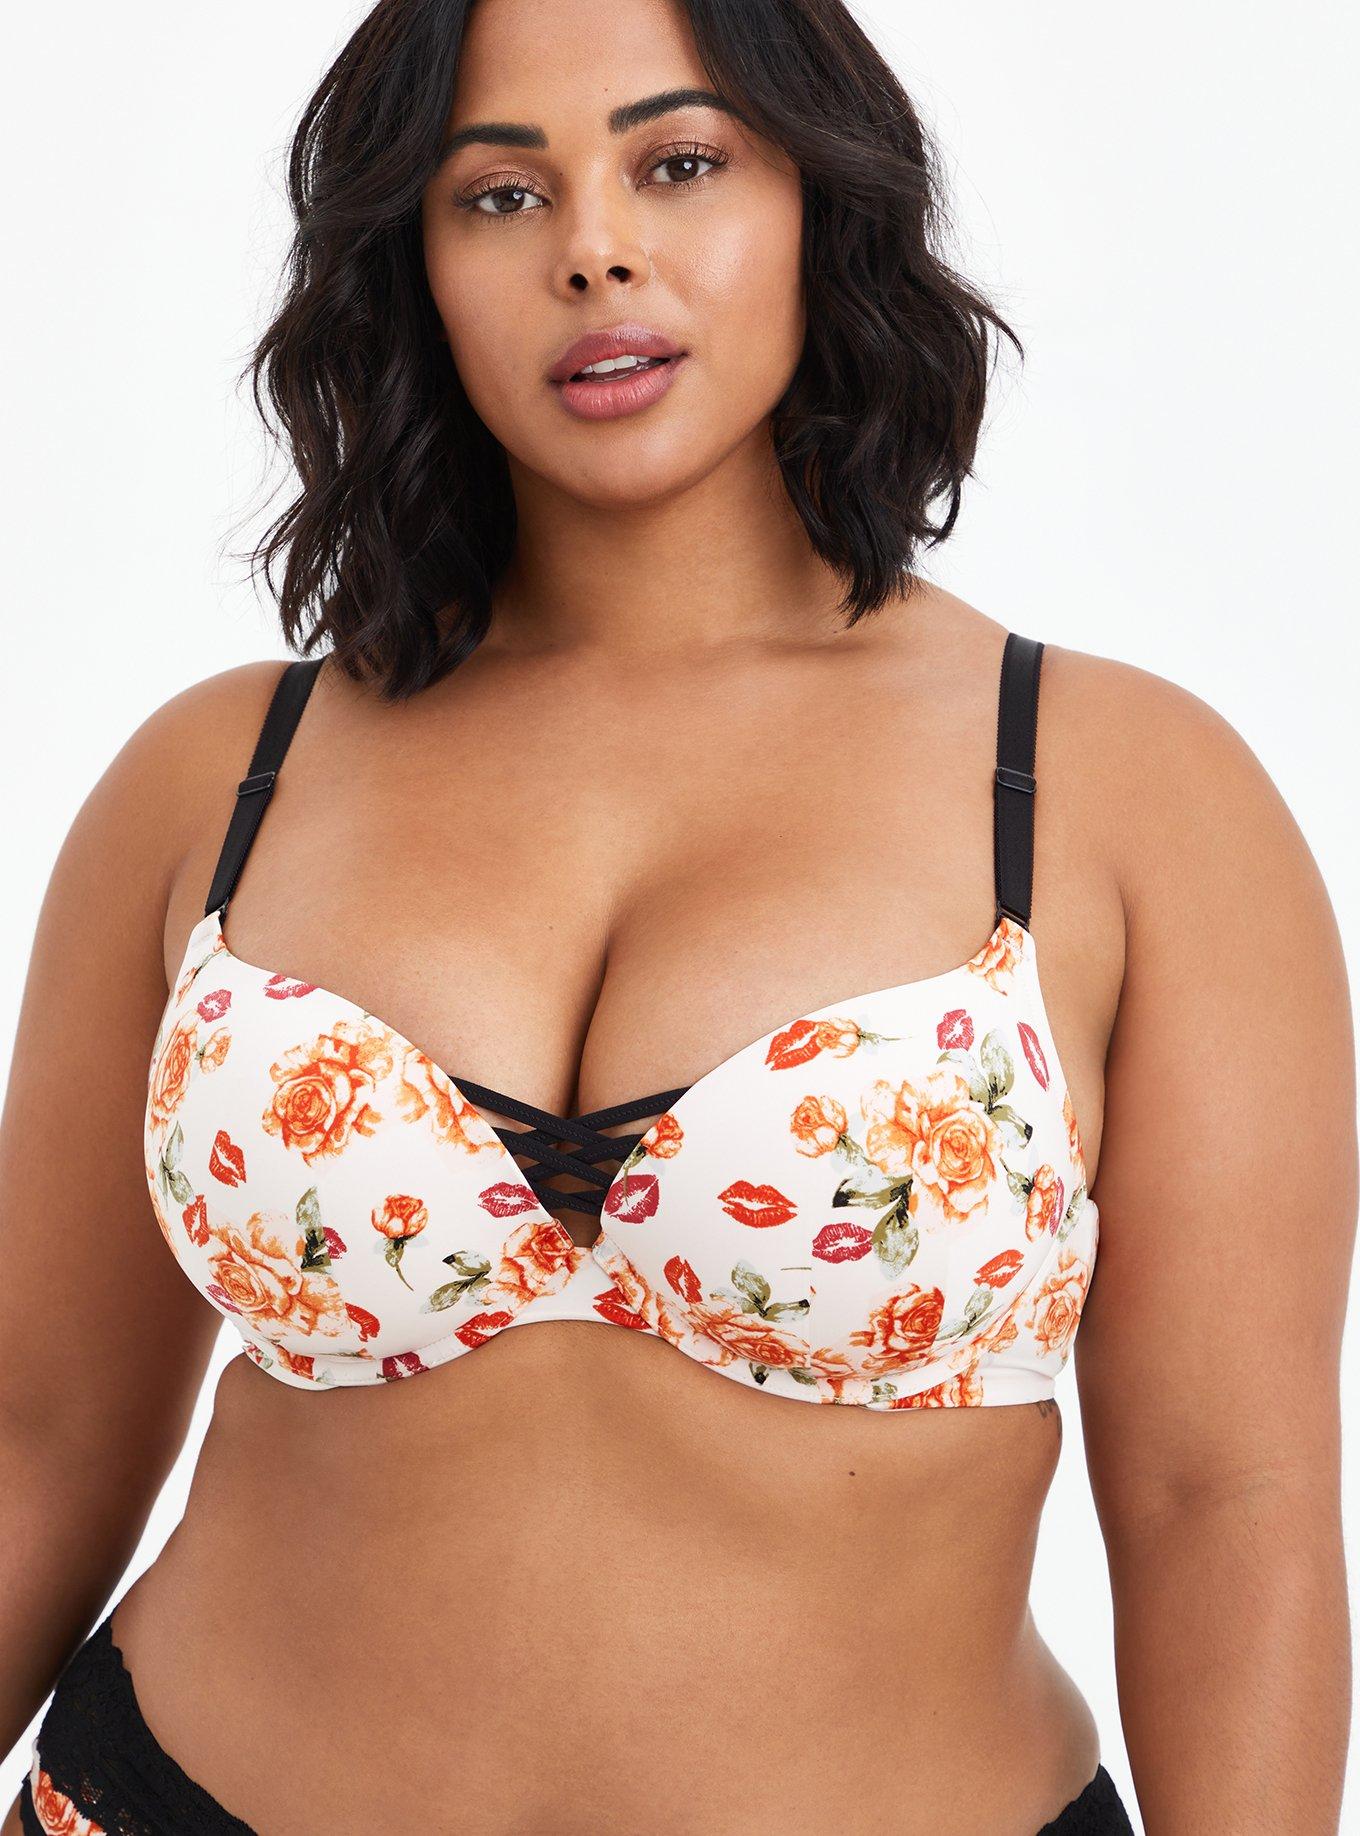 Best Double Padded Push Up Bras 38b for sale in Calgary, Alberta